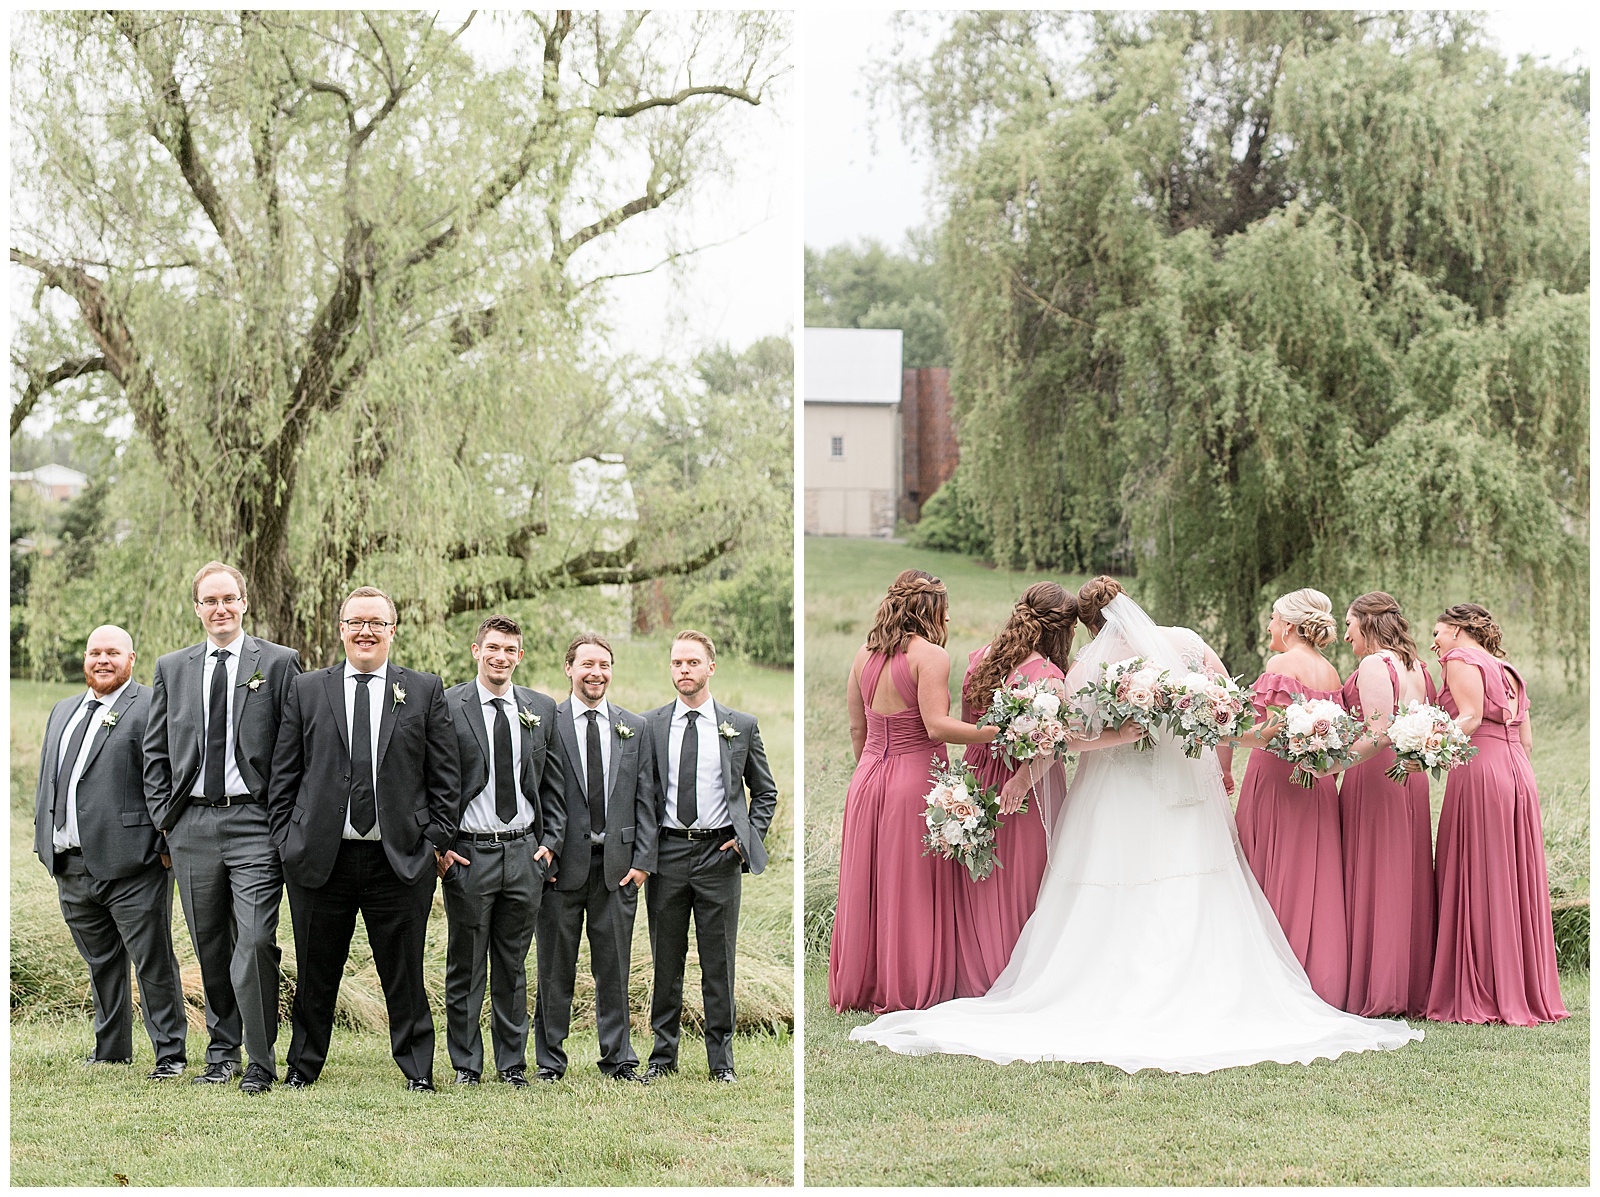 groom and bride surrounded by bridal party and standing close together near willow tree